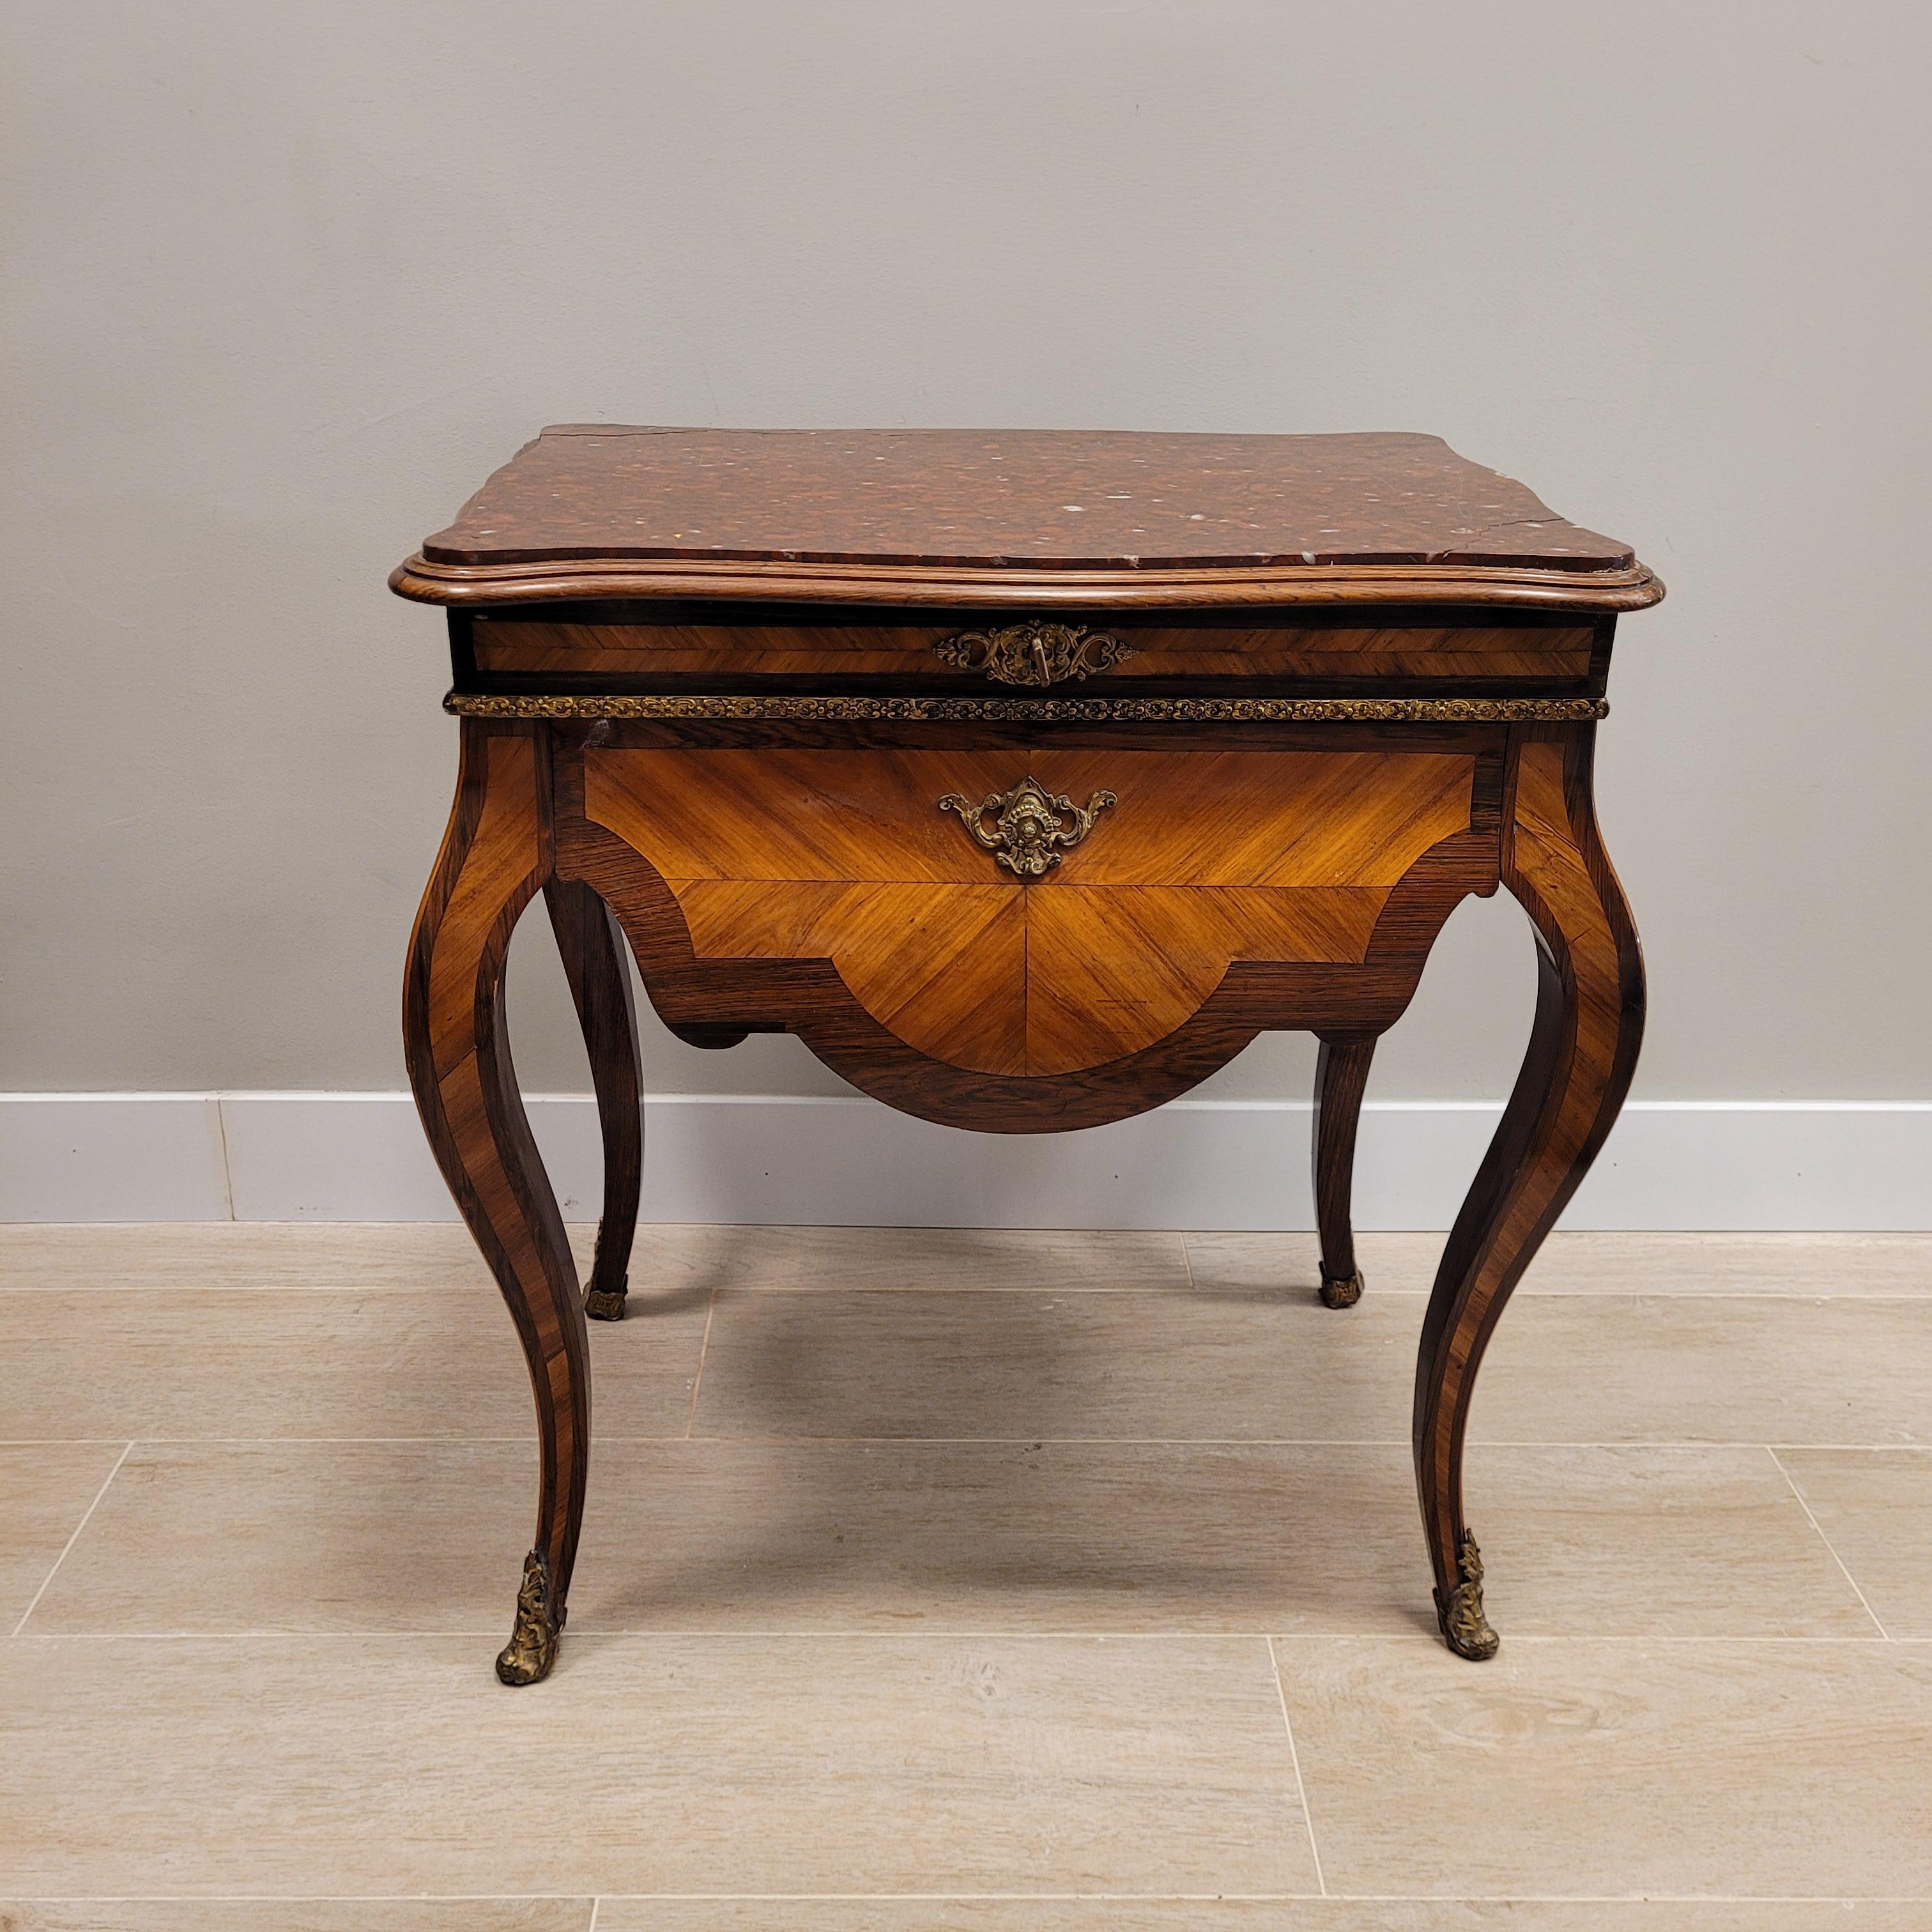 One of a kind French auxiliary furniture, Louis XV style, Napoleon III period in precious woods and with marquetry, originating in an important Parisian workshop in the mid-19th century.
This rare piece of furniture is adorned with light wood